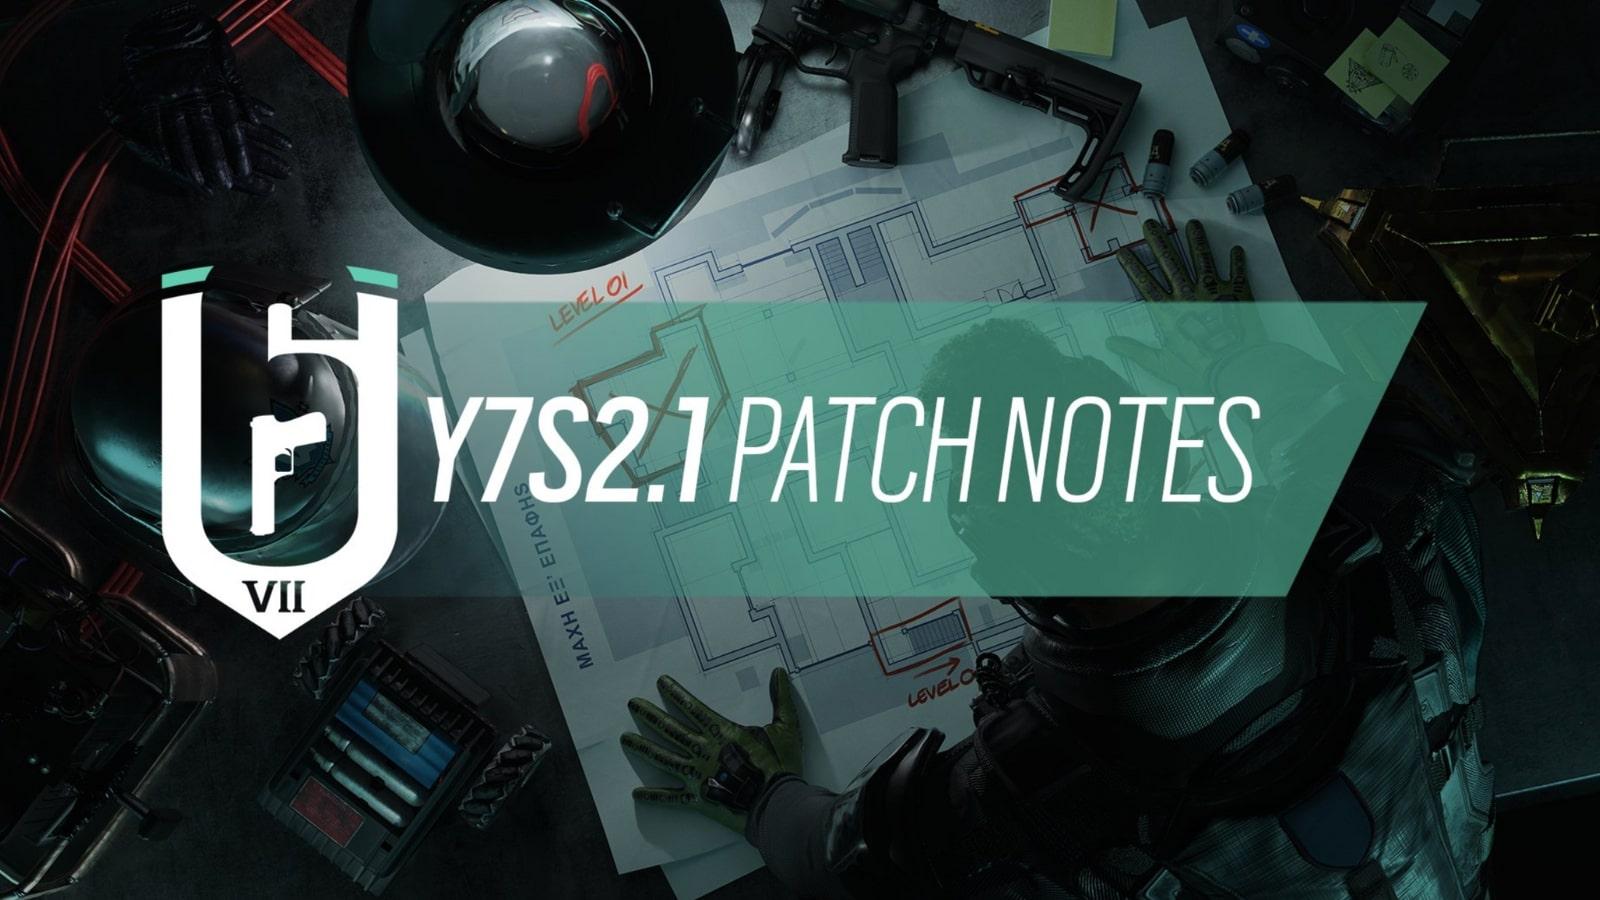 Rainbow Six patch notes feature image